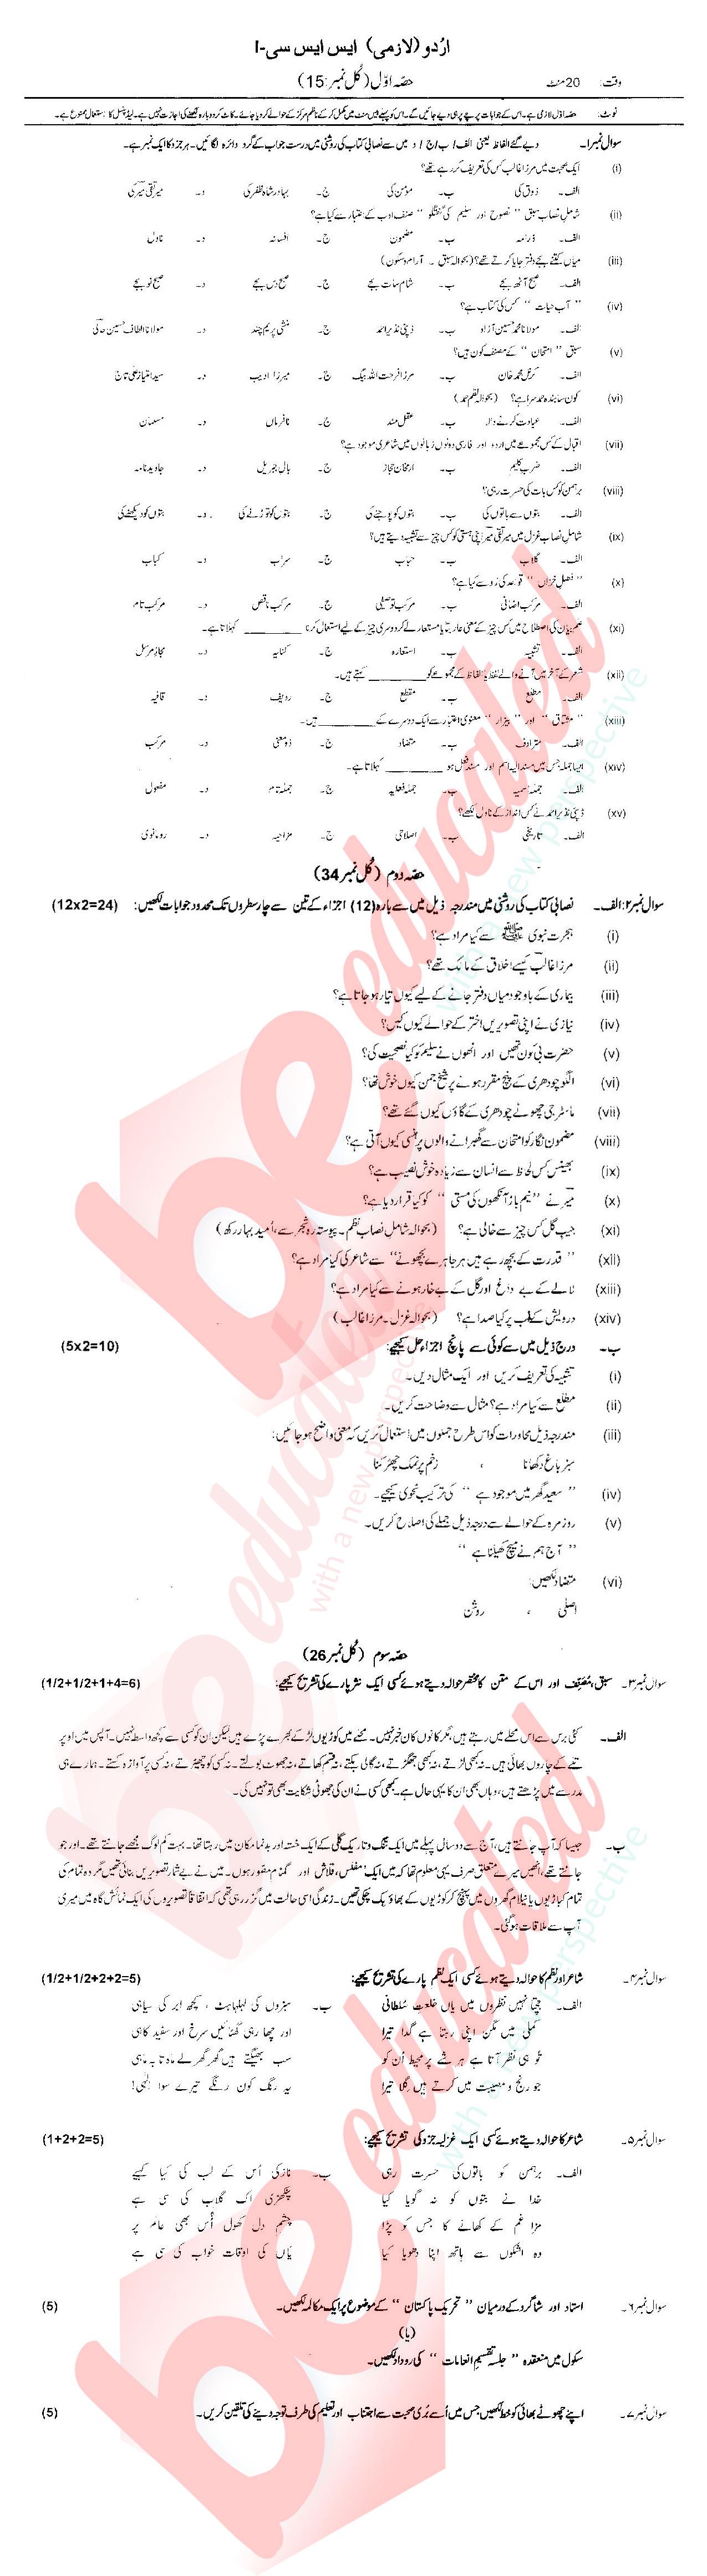 Urdu 9th class Past Paper Group 1 Federal BISE  2017